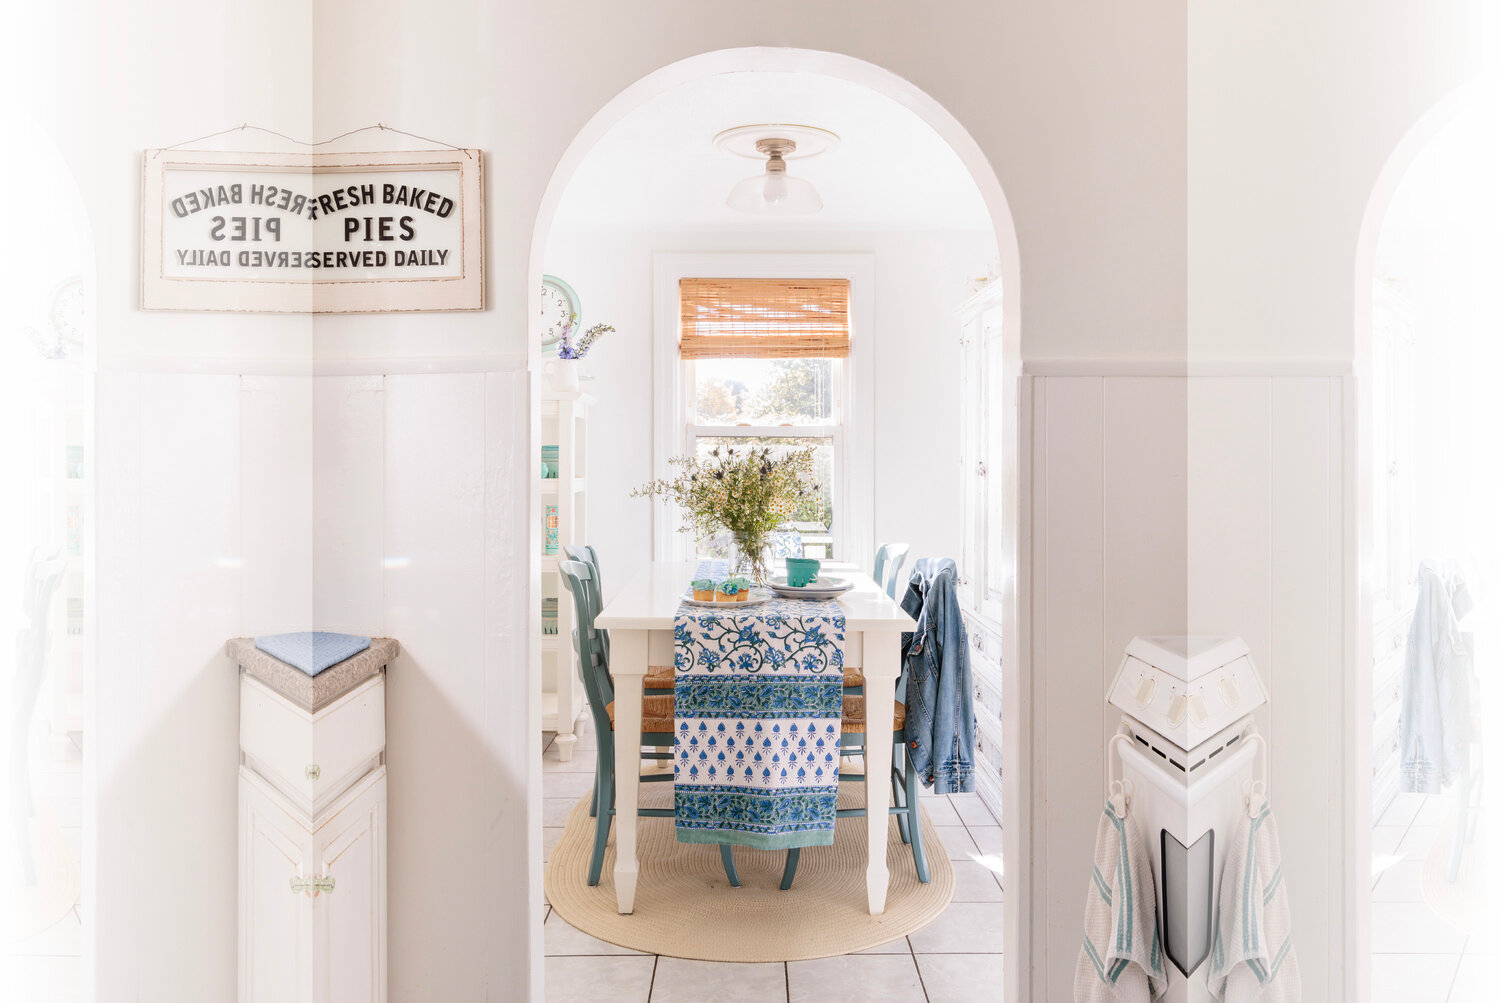 Kept free of a door or curtain, the archway opens up the kitchen to the dining room and allows for traffic 
flow and a sense of visual continuity